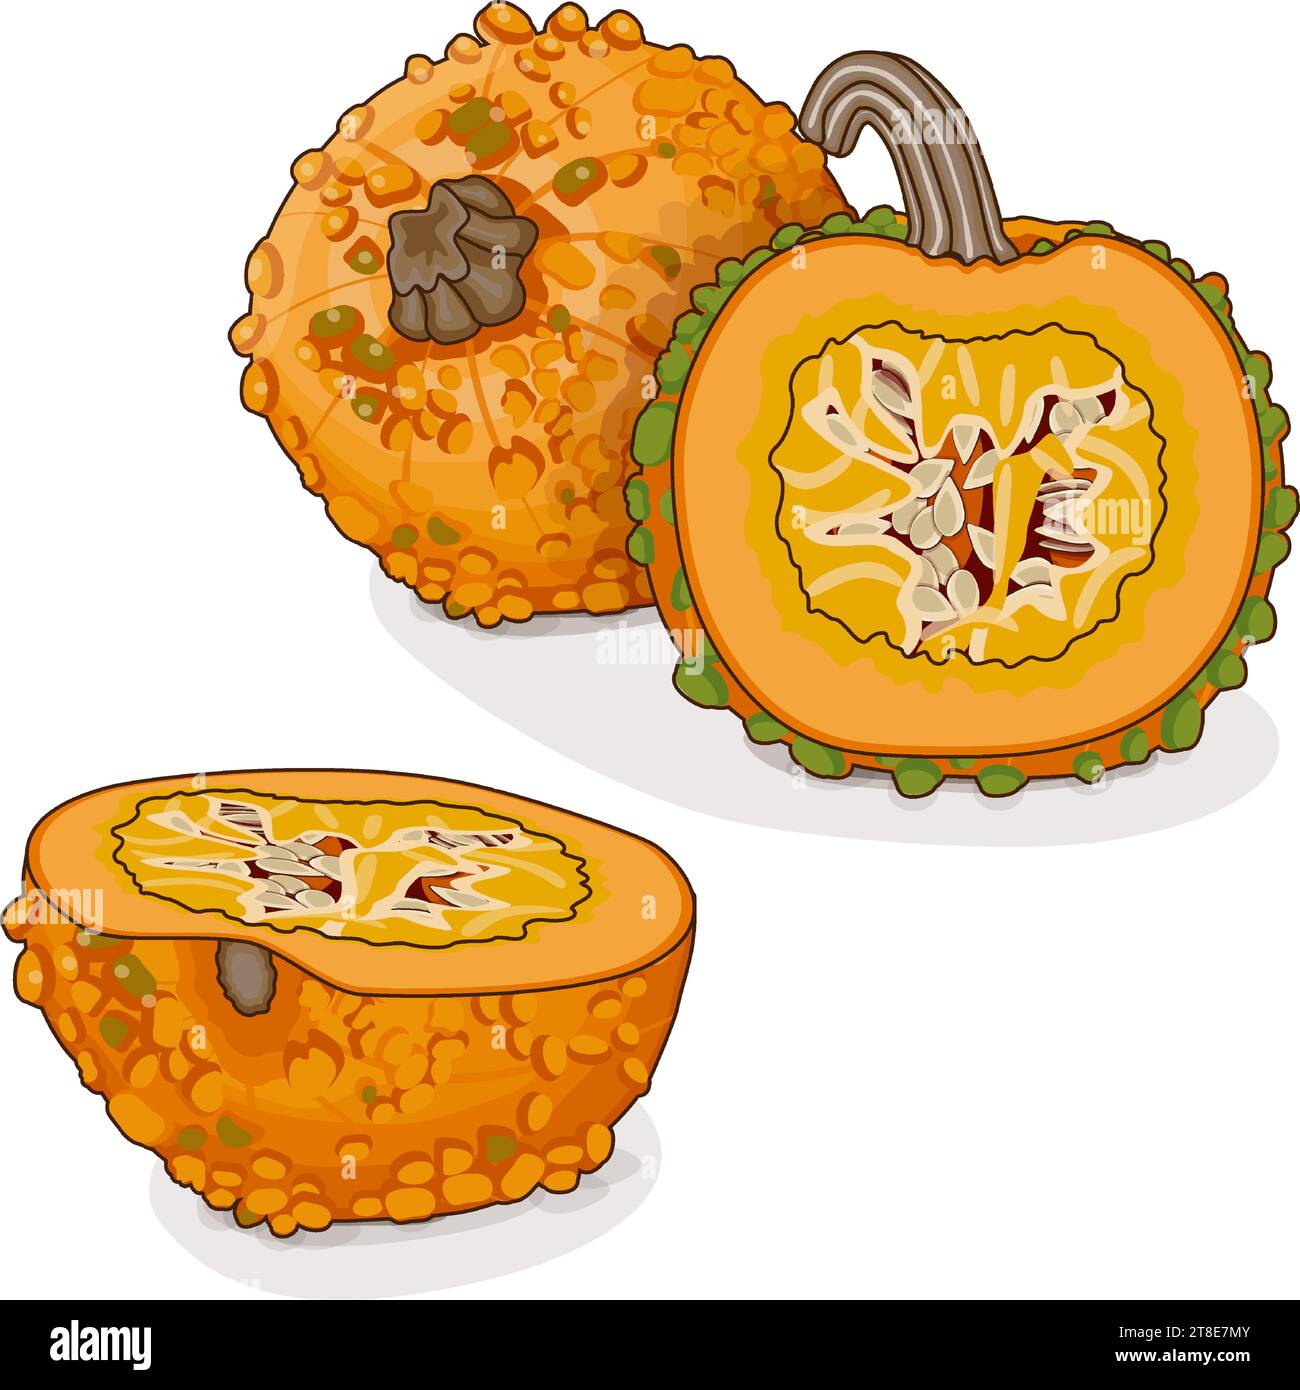 Whole and chopped Knucklehead Pumpkins. Winter squash. Cucurbita pepo. Vegetables. Clipart. Isolated vector illustration. Stock Vector